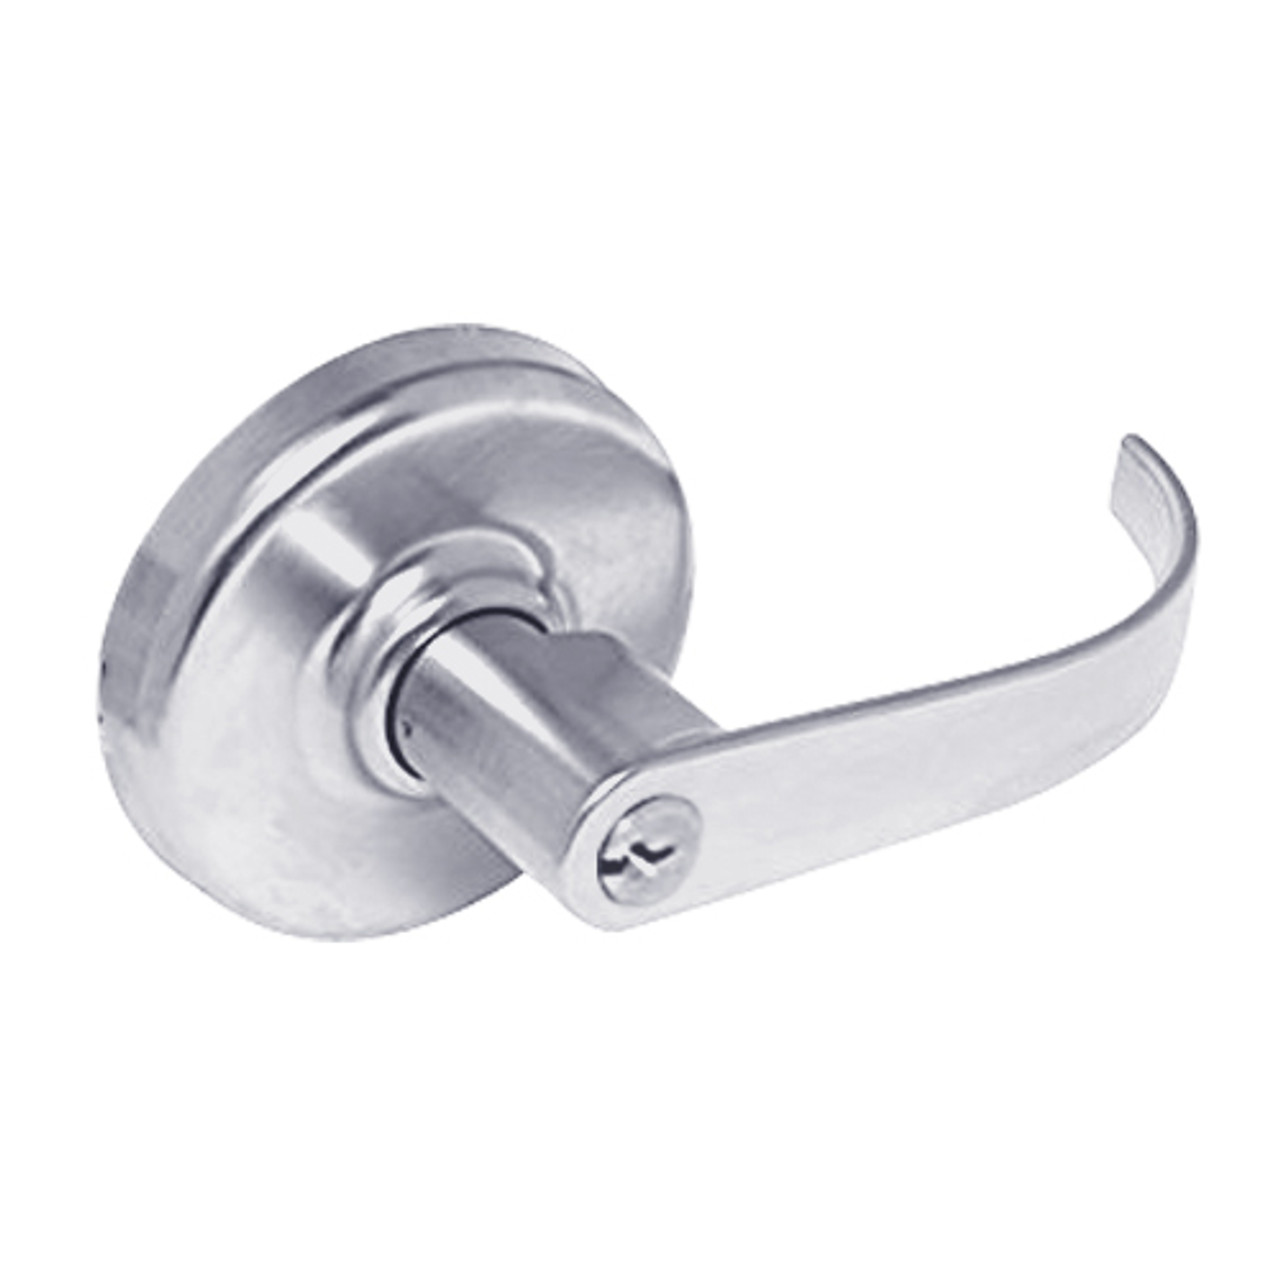 CL3157-PZD-626 Corbin CL3100 Series Vandal Resistant Storeroom Cylindrical Locksets with Princeton Lever in Satin Chrome Finish